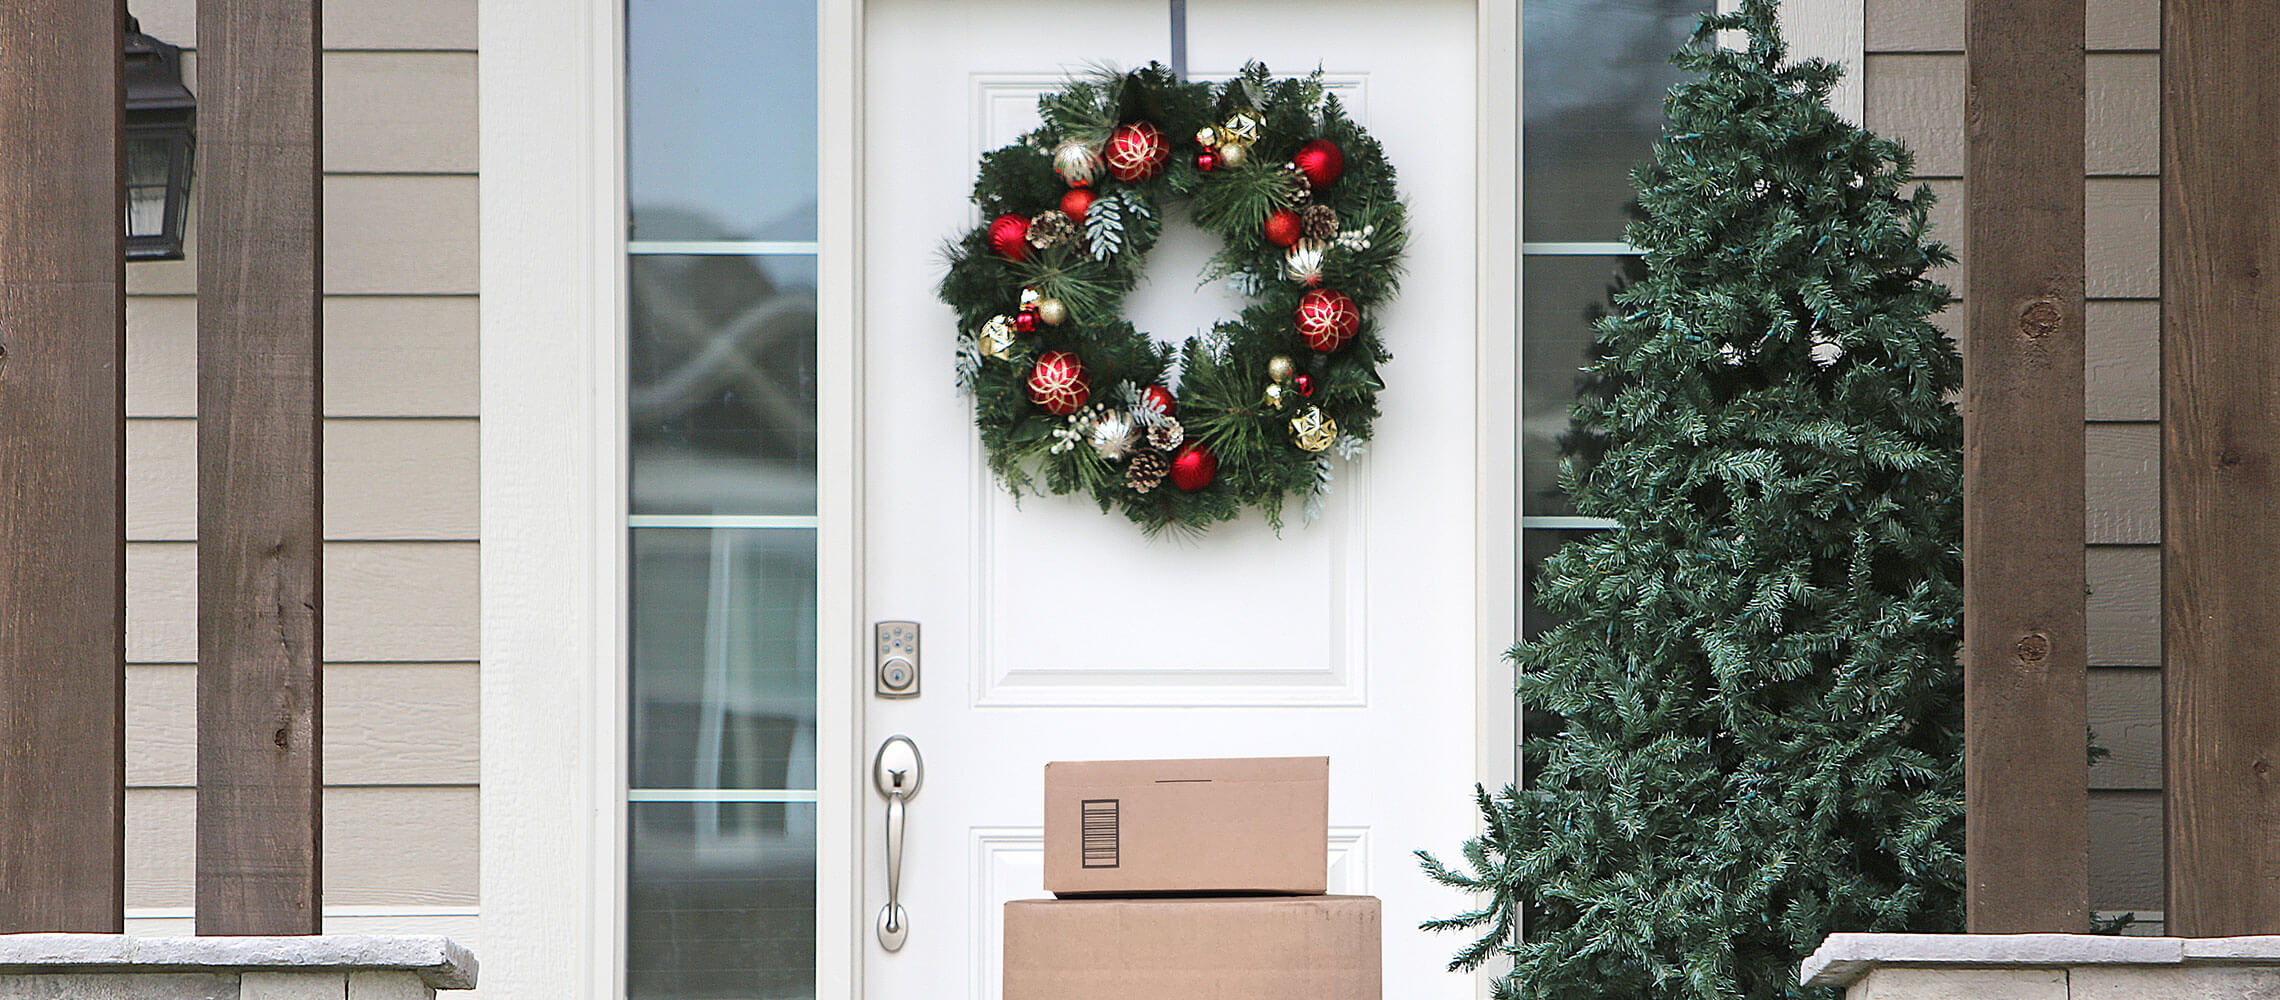 delivery packages on house front door